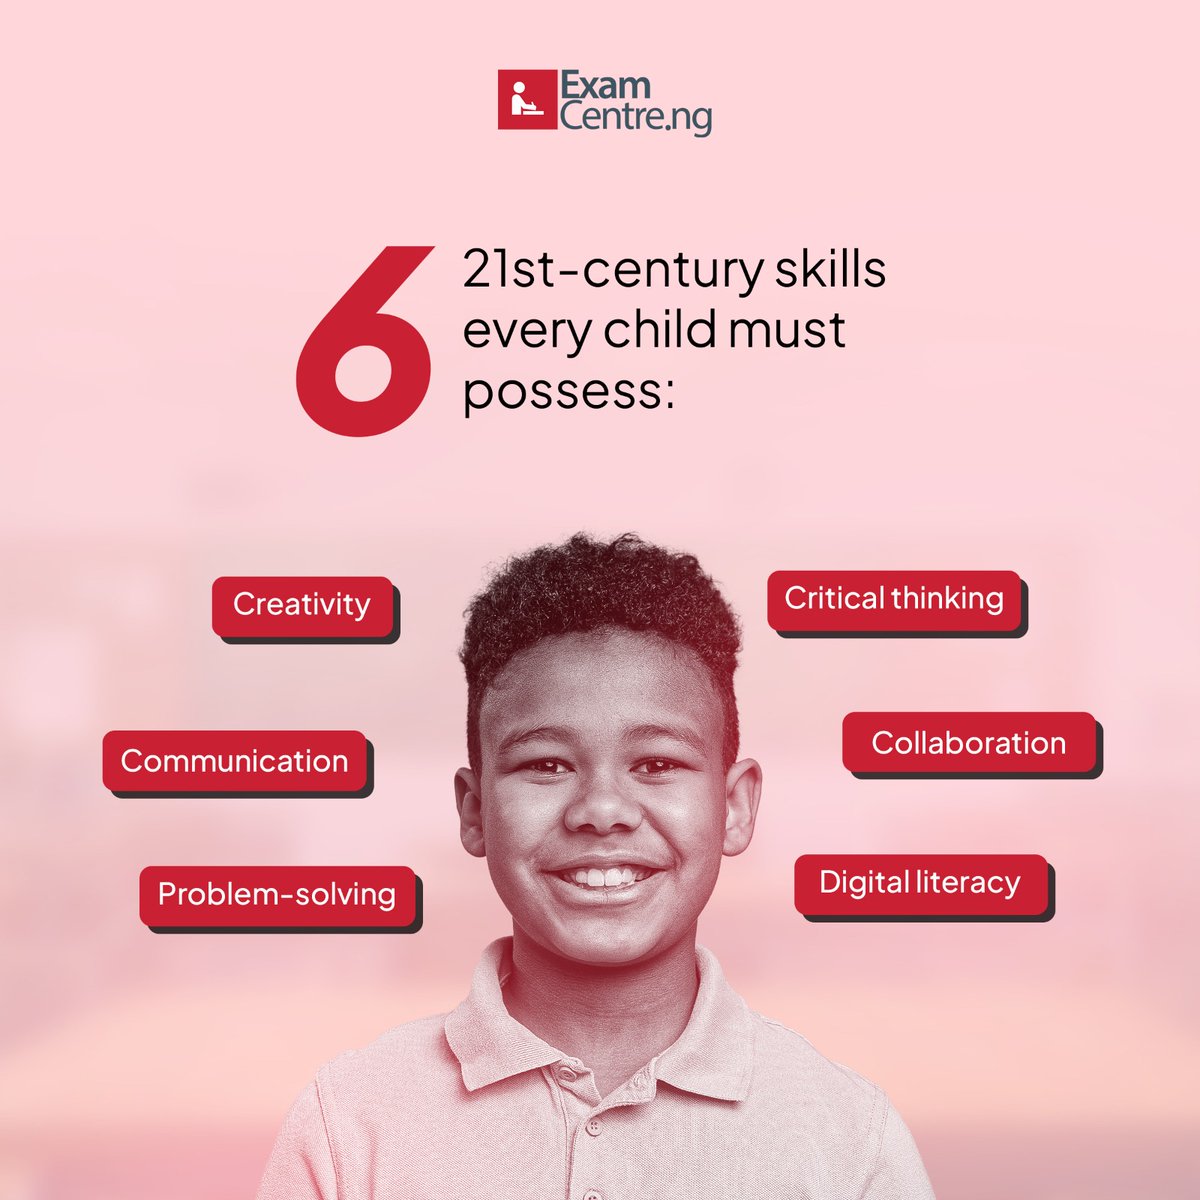 There's a champion in every child.

Let's prioritize their overall development. Start by equipping them with these 21st-century skills.

Happy New Week 💃

#parents #parenting #nigerianmoms #nigeriandads #parentingtips #explore #studytips